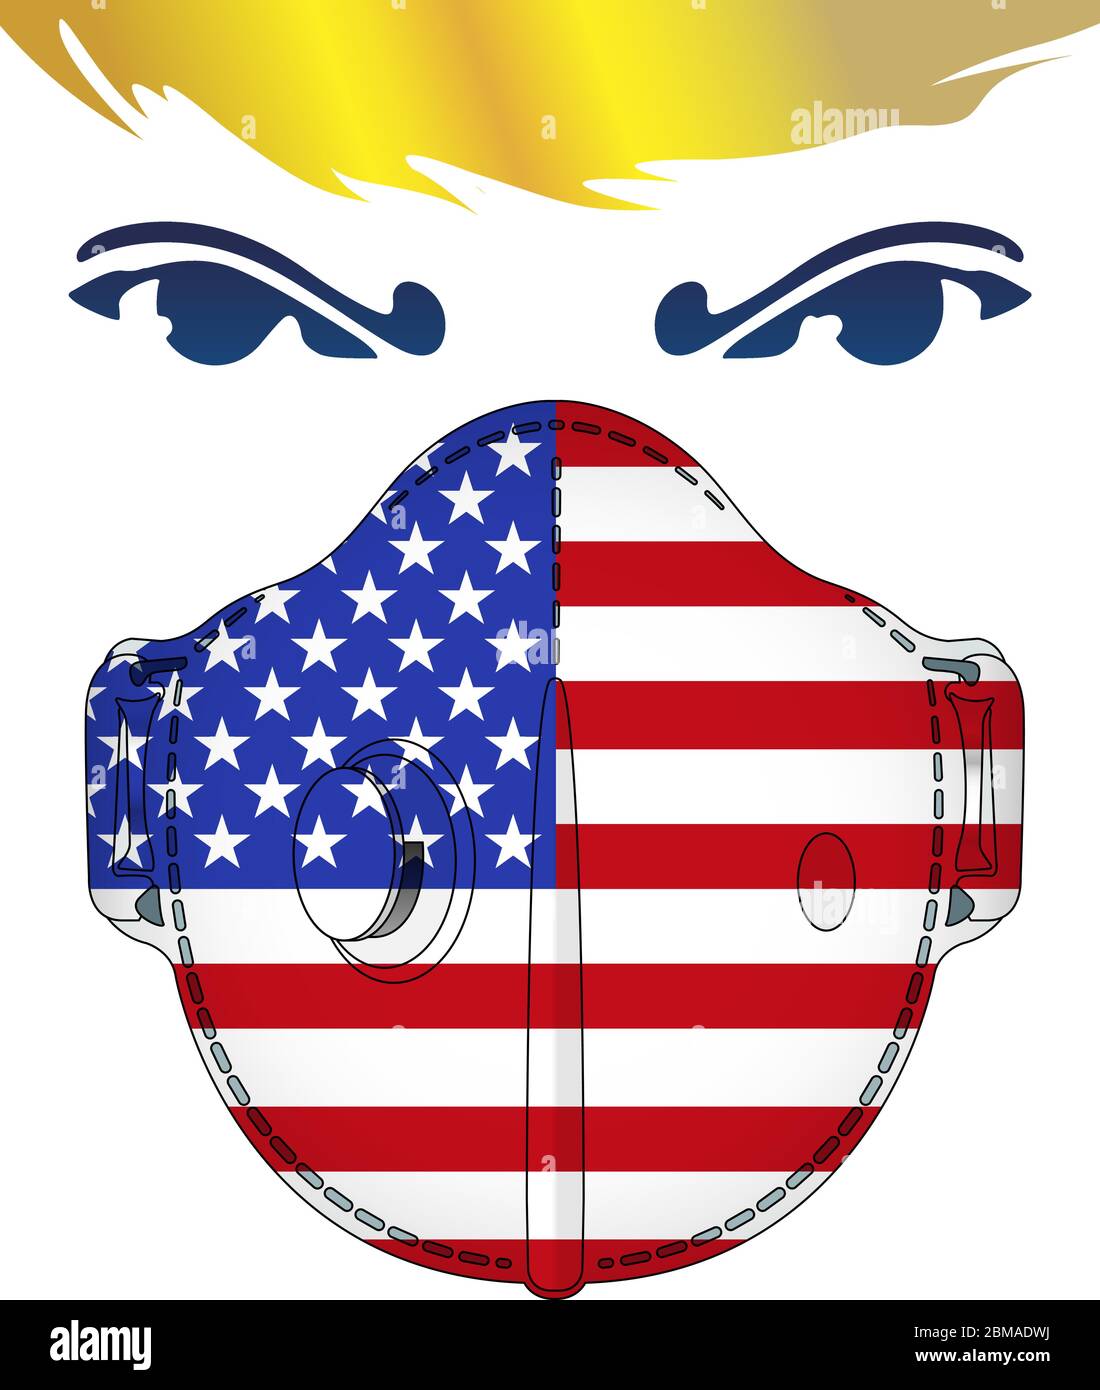 Antiviral mask with US flag with Donald Trump style portrait, vector illustration Stock Vector